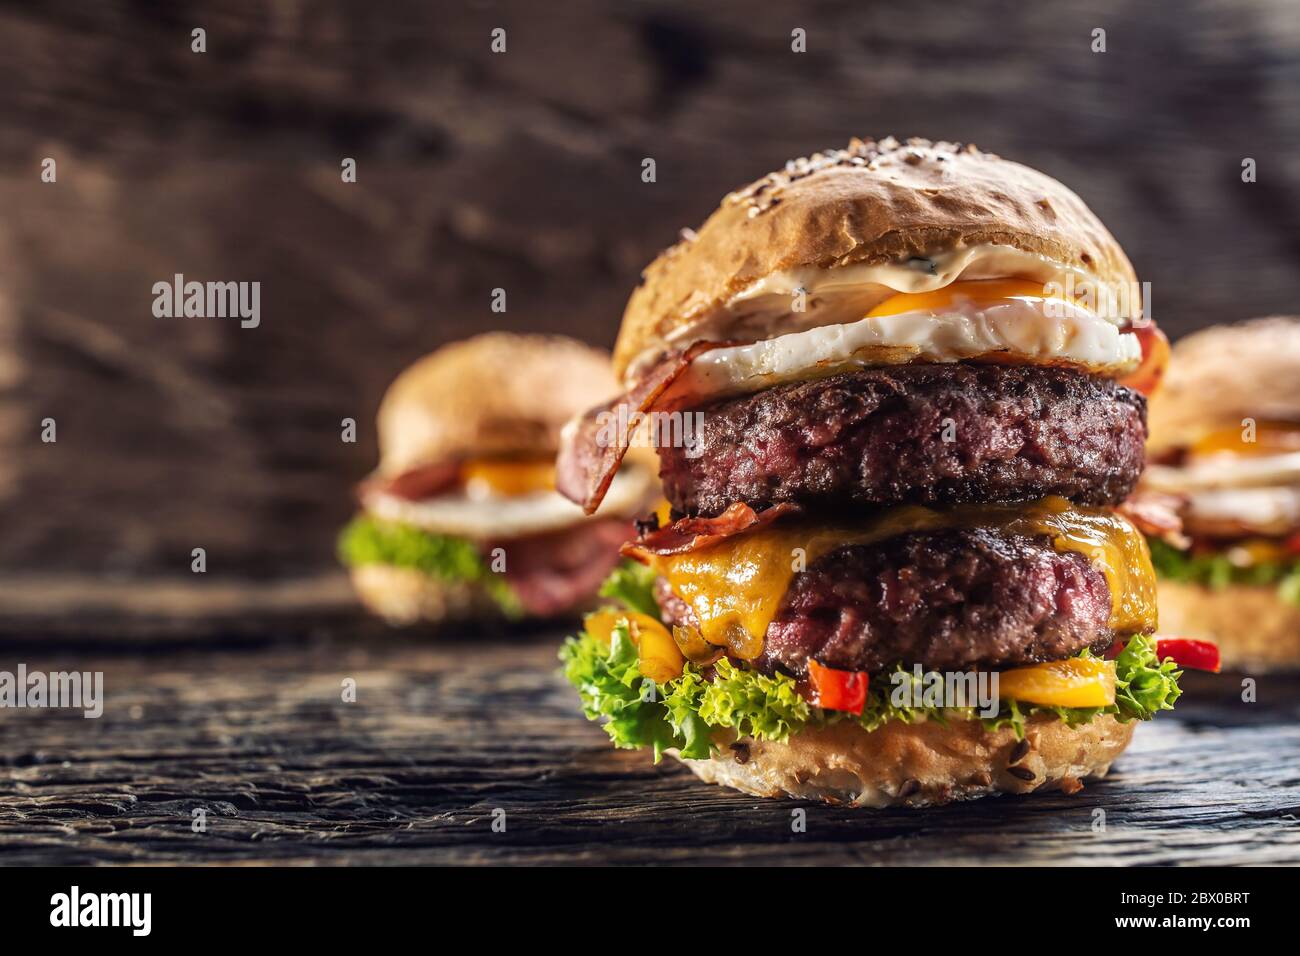 Delicious double beef burger with melted cheese in a vintage surroundings with two more burgers in the background Stock Photo